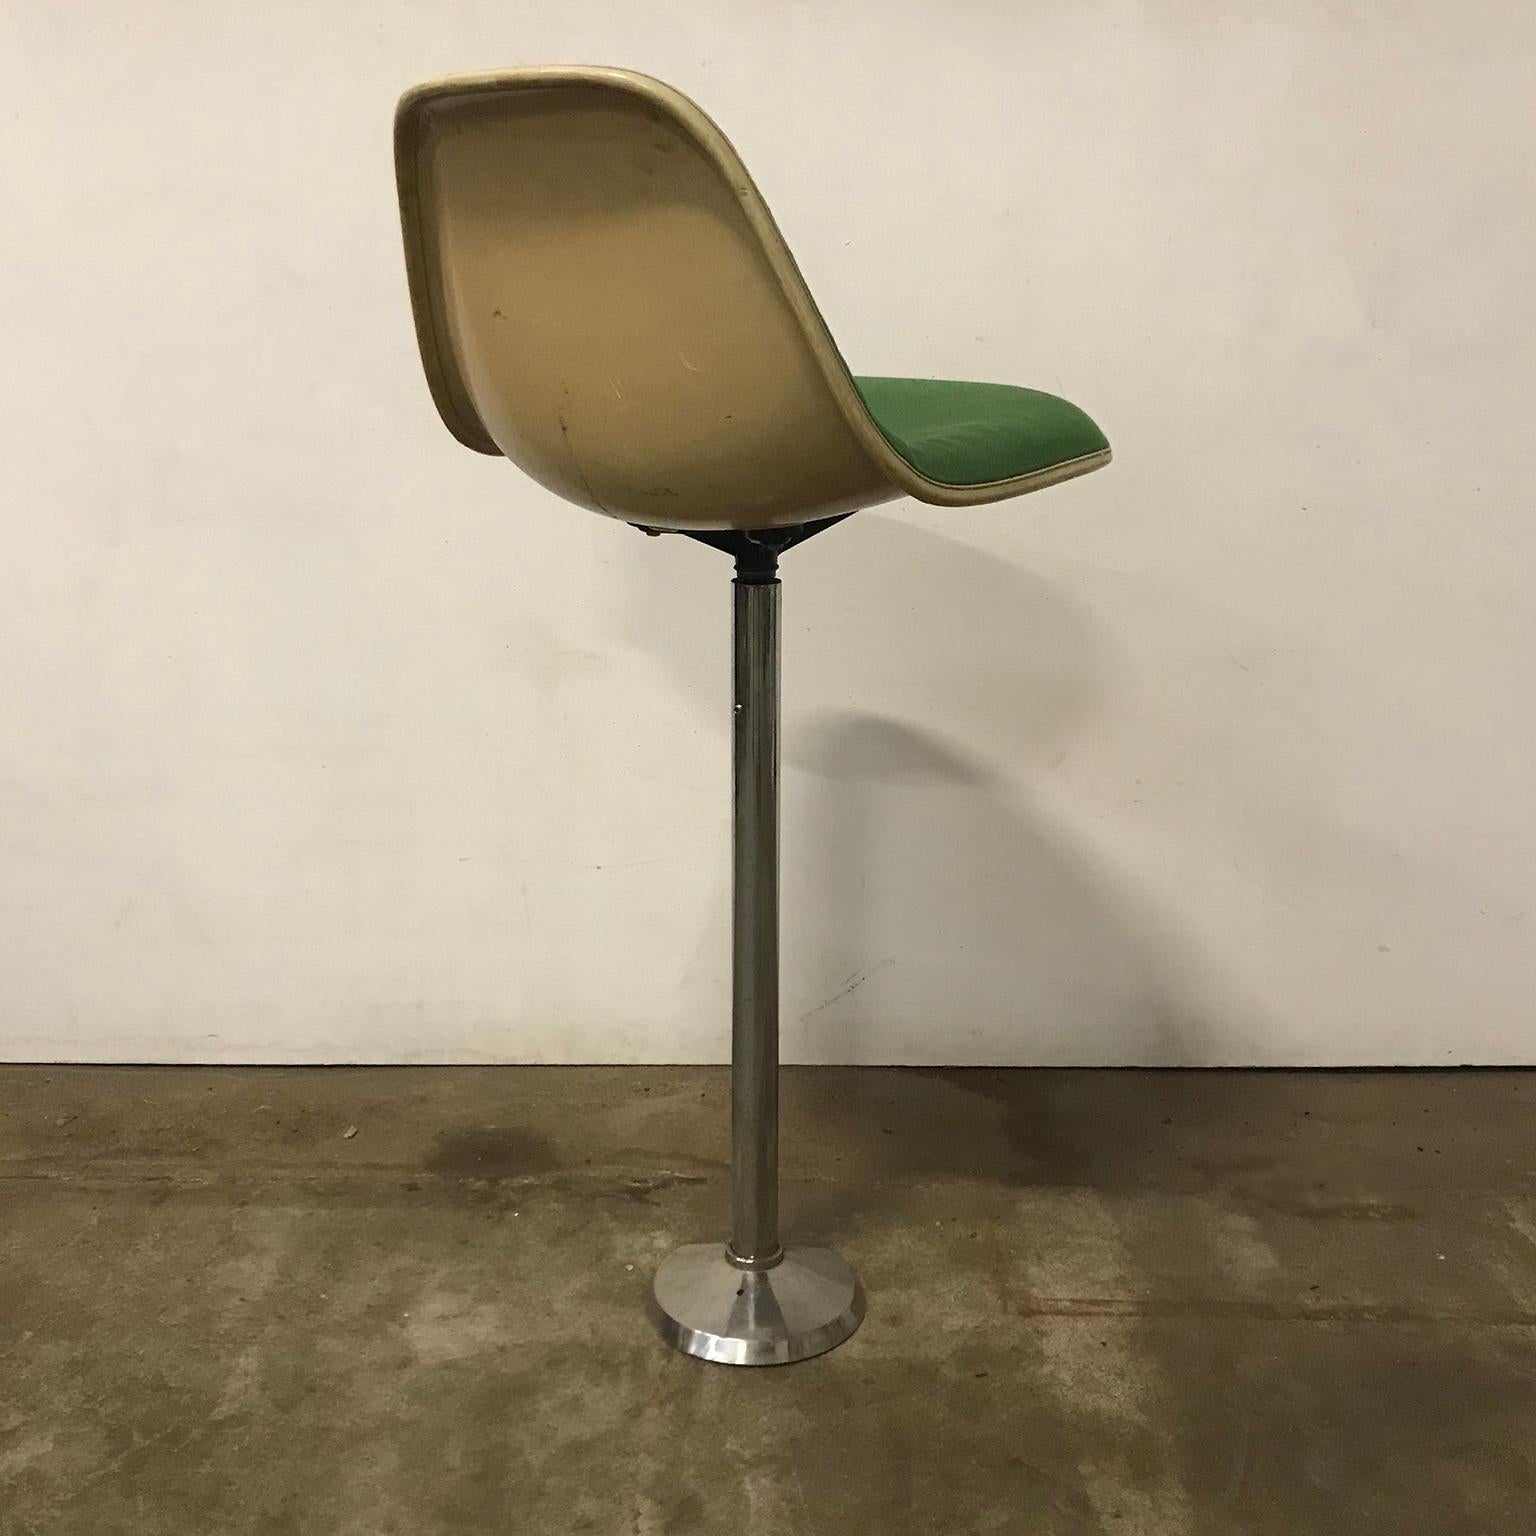 American 1969 Eames Herman Miller/Fehlbaum Extremely Rare White Barstools in Green Fabric For Sale